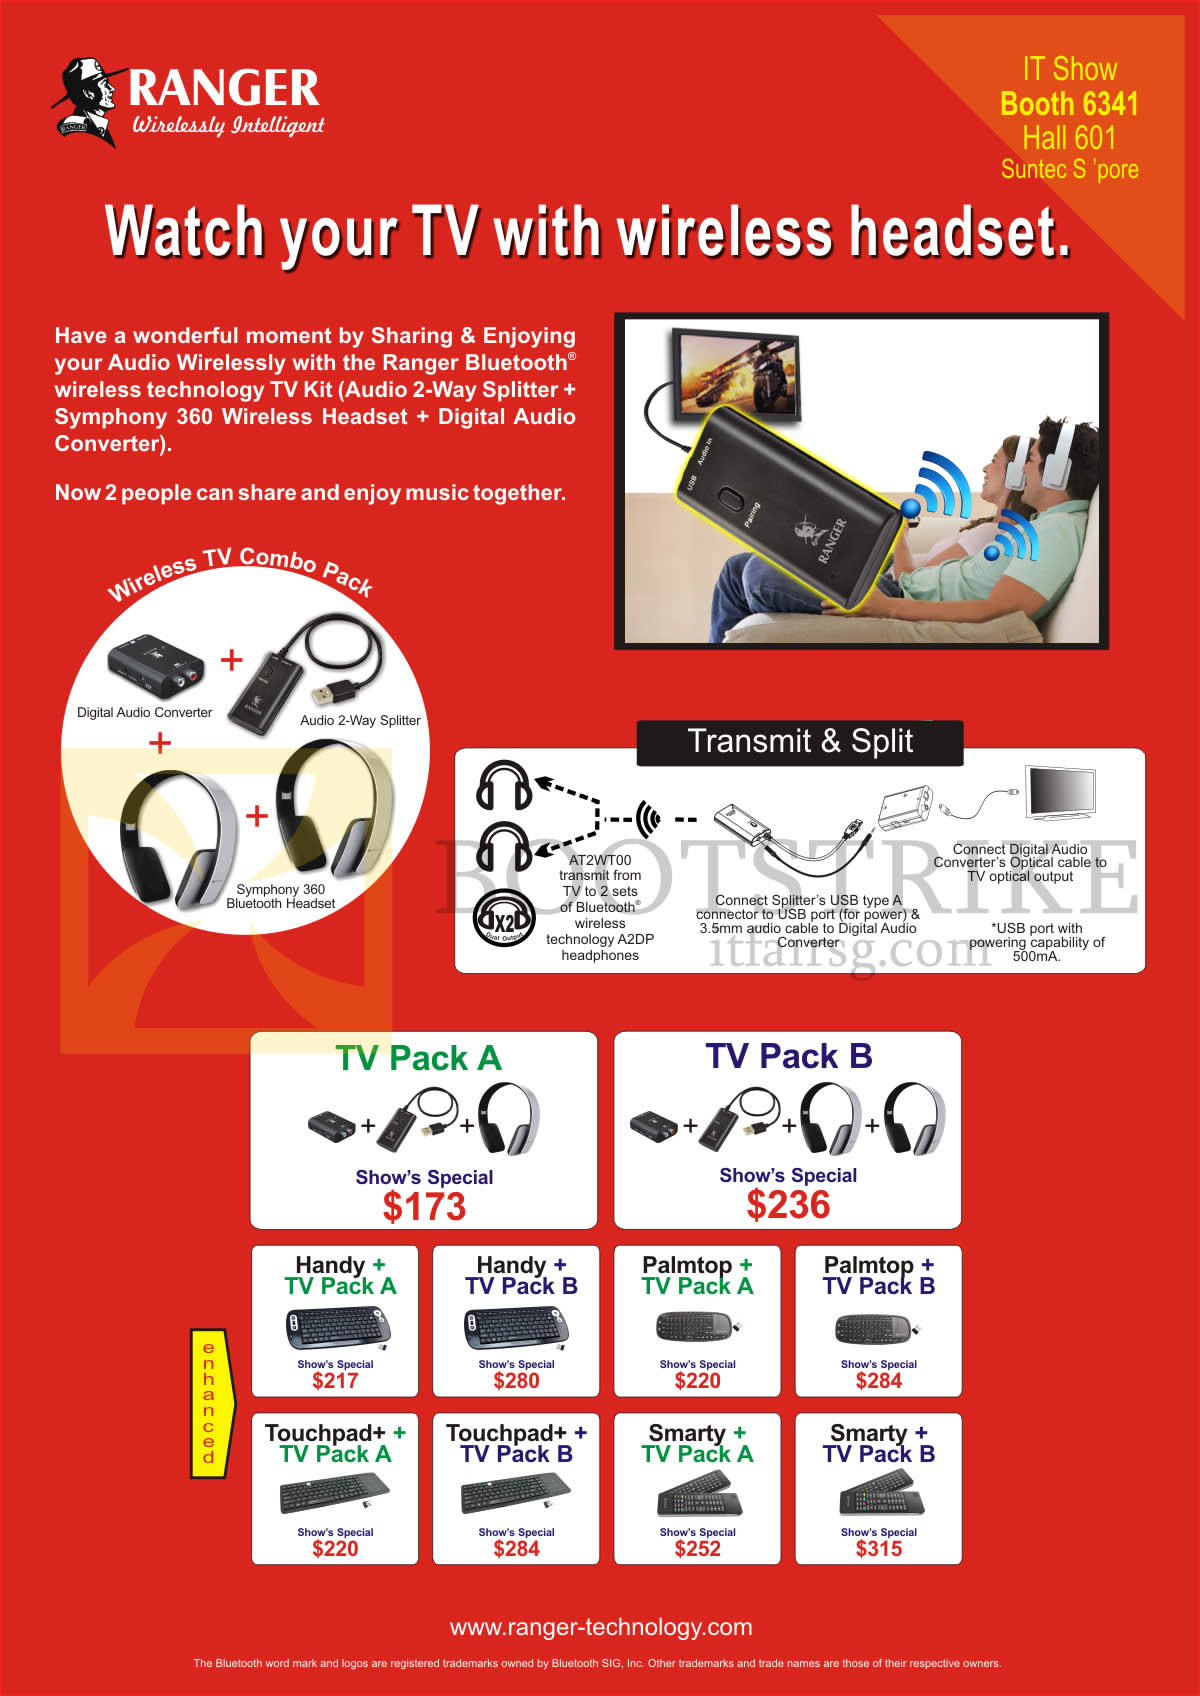 IT SHOW 2015 price list image brochure of Systems Tech Ranger Wireless TV Combo Packs, Headset, Keyboard